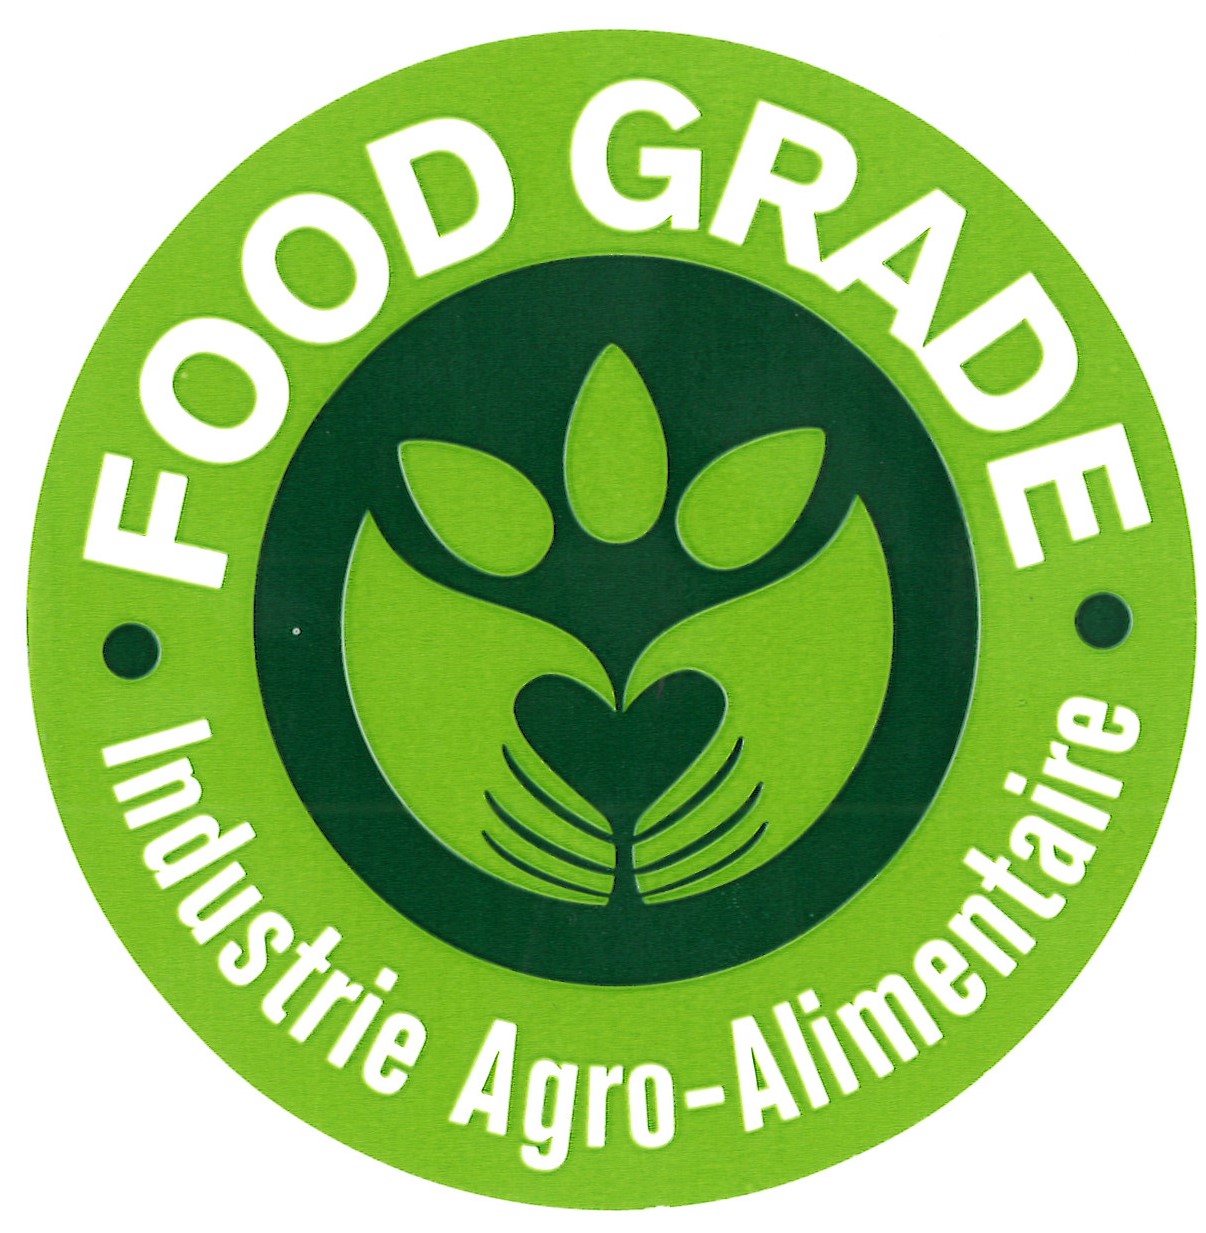 Industrie Agro-Alimentaire